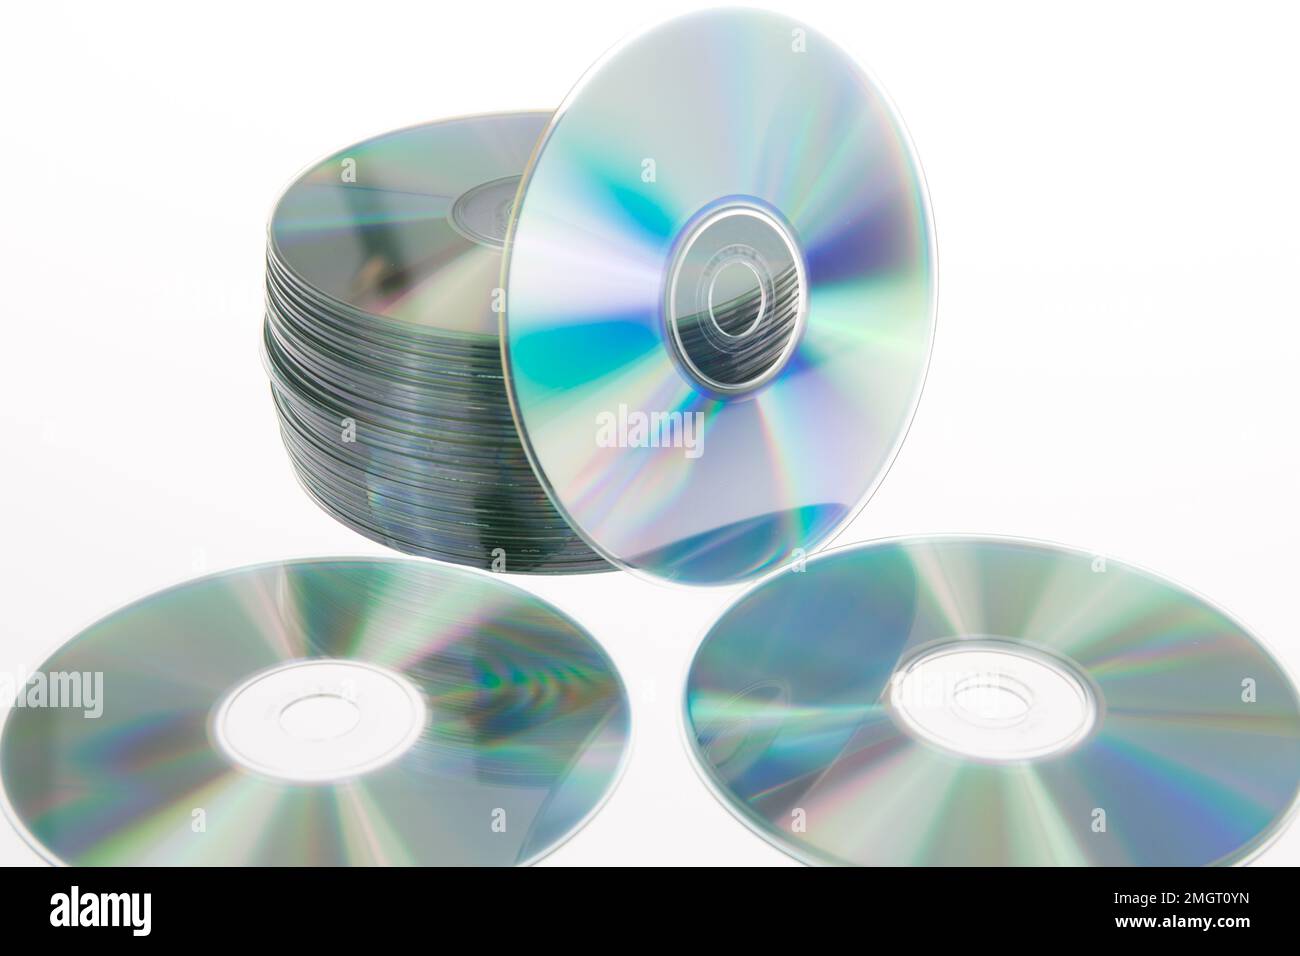 Compact disc stack discs on a white background Stock Photo